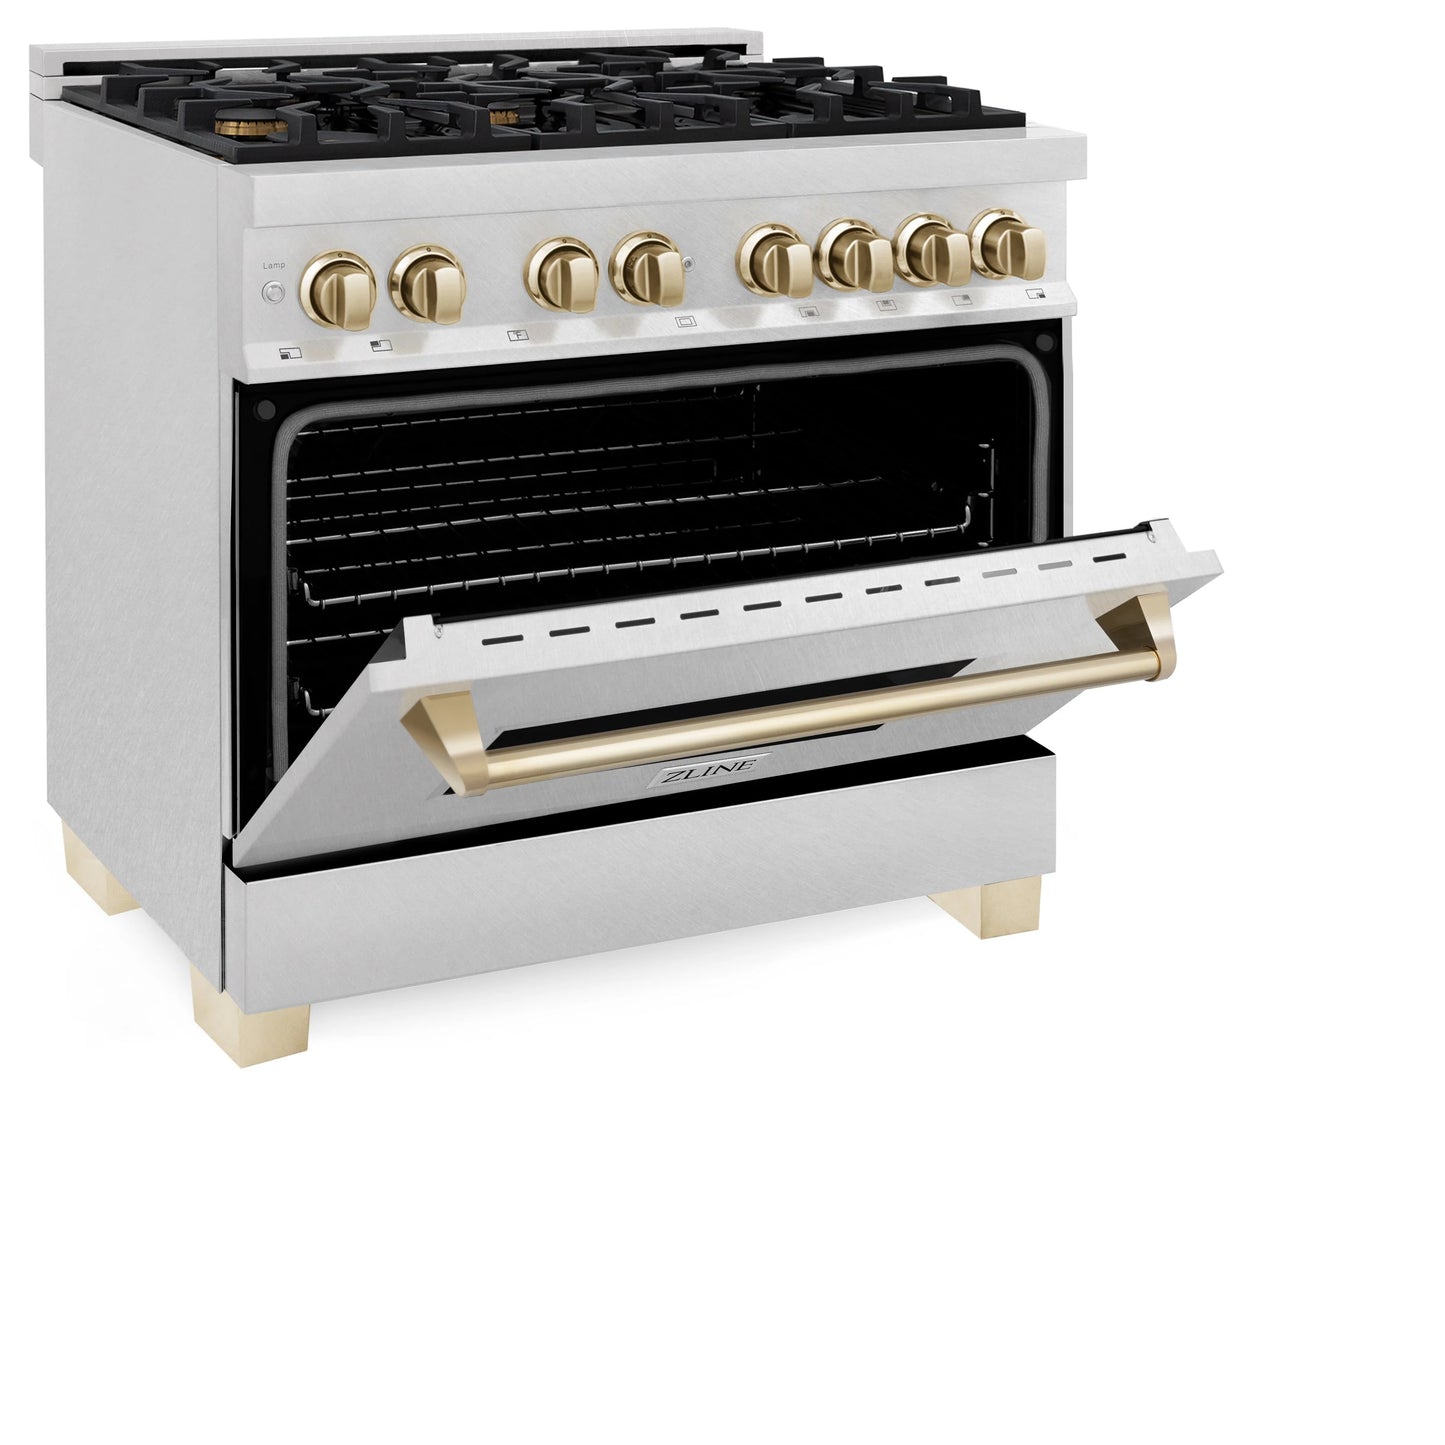 ZLINE Autograph Edition 36 in. Dual Fuel Range in DuraSnow Steel with Gold Accents (RASZ-SN-36-G)